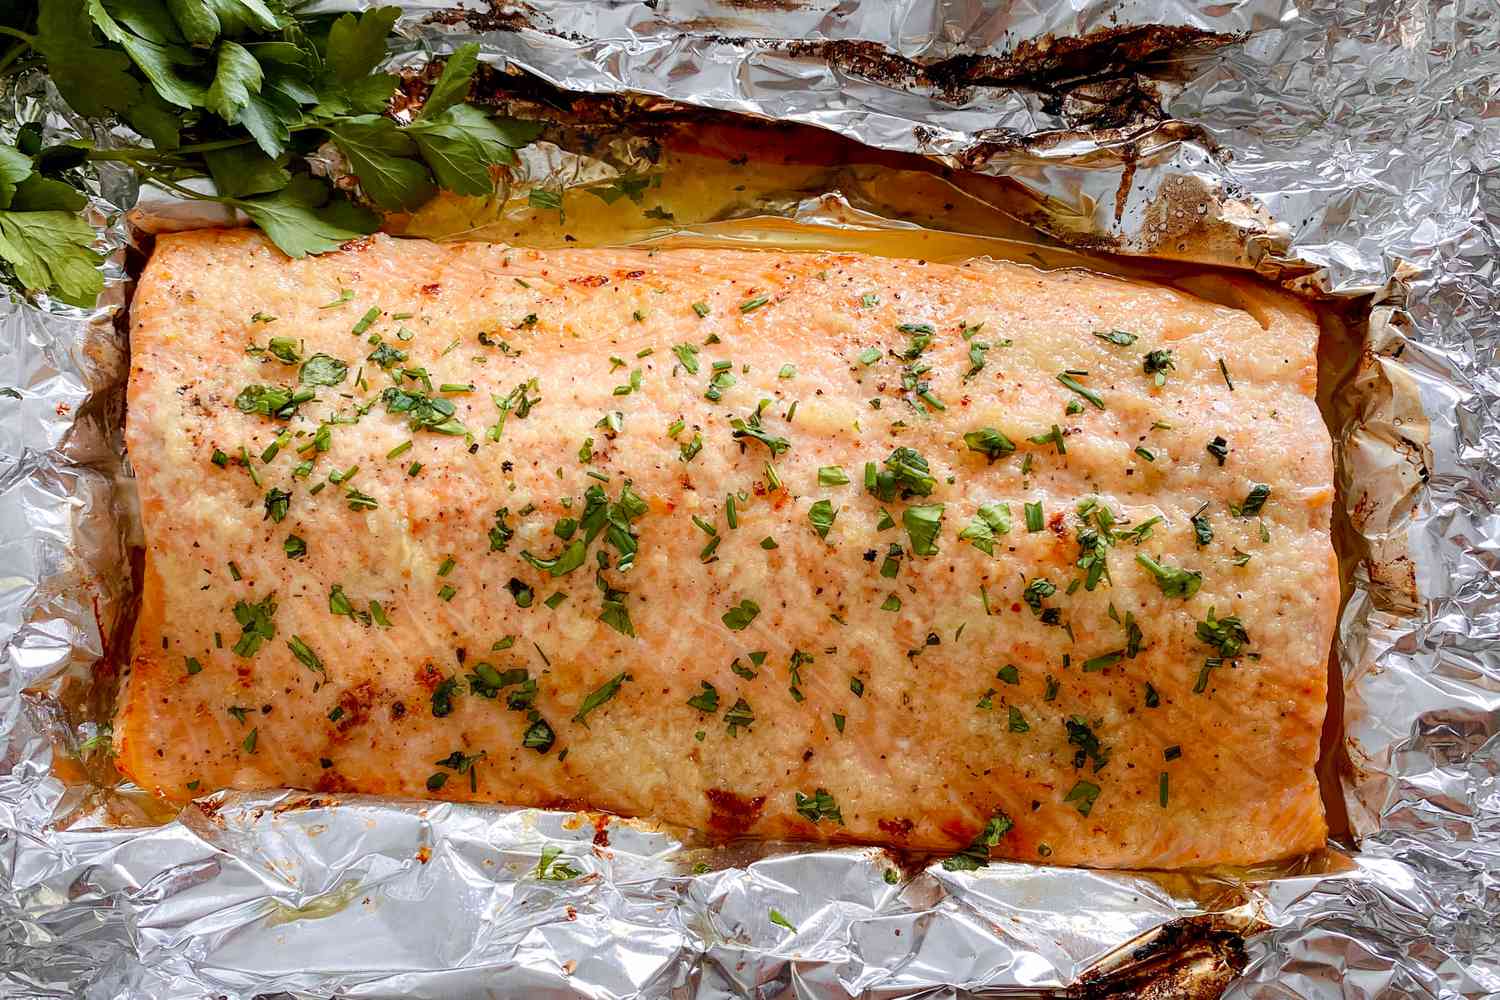 A seasoned salmon fillet placed in a baking dish, ready to be baked at 350 degrees.